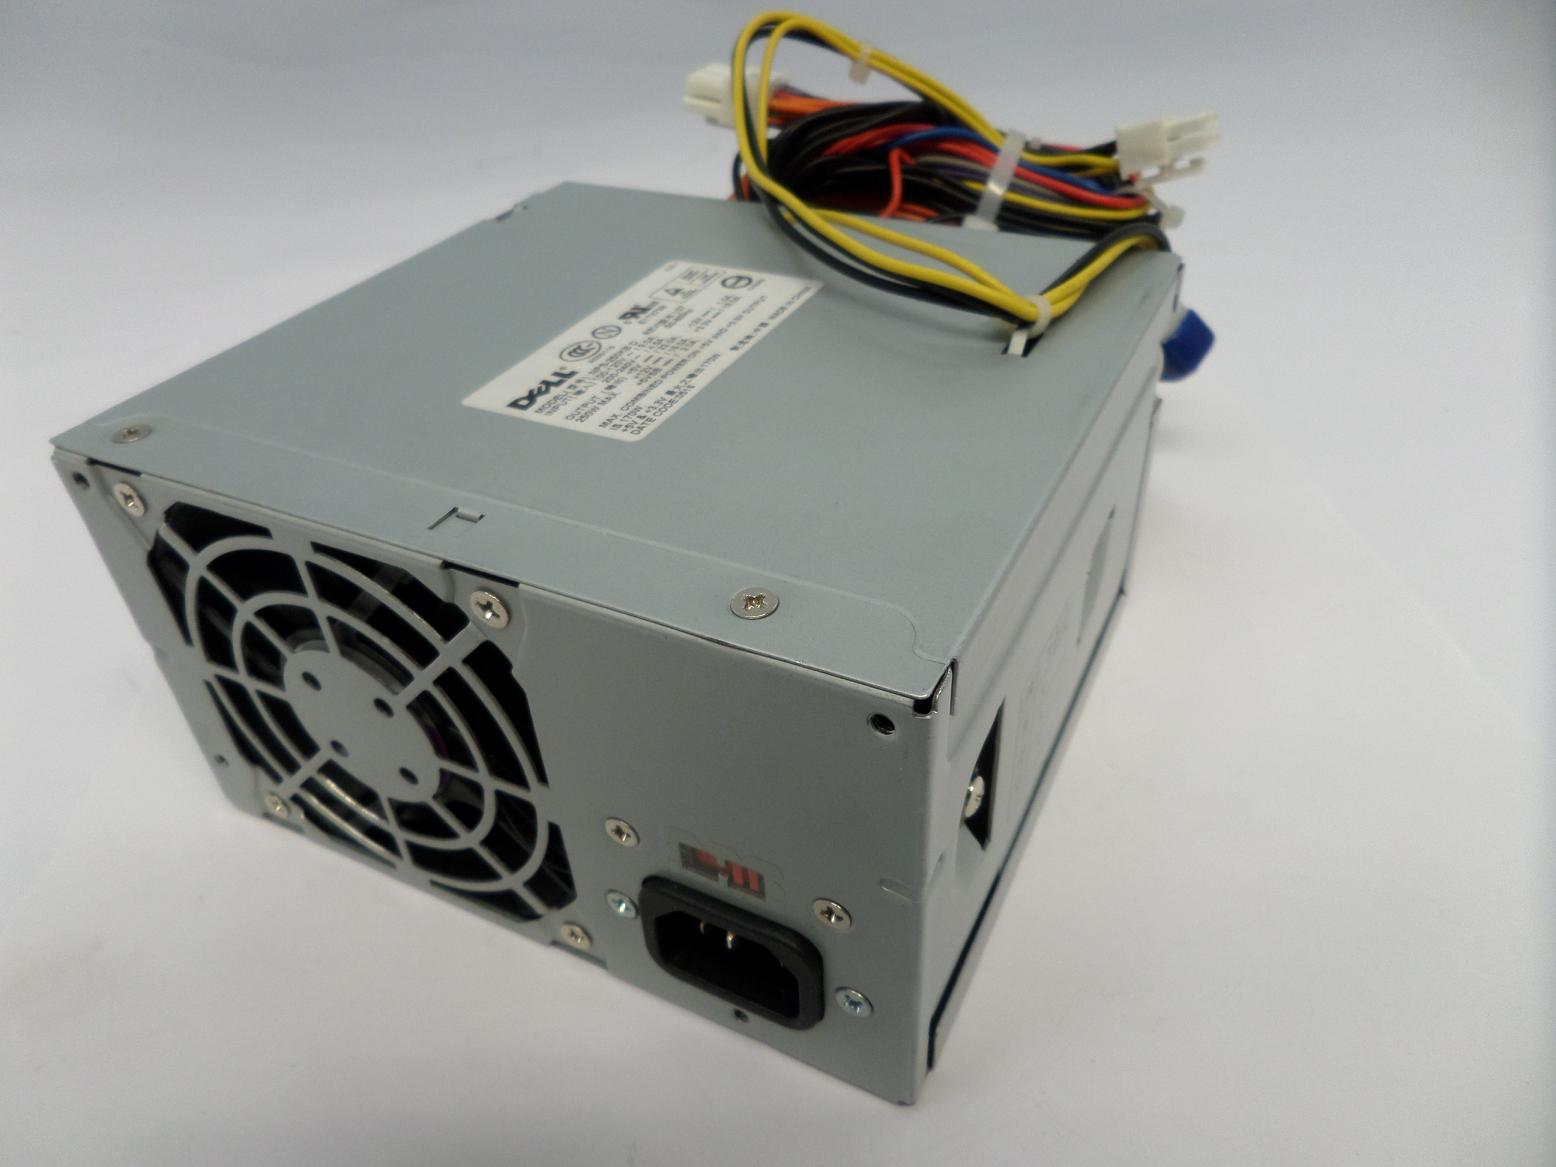 0H2678 - Dell 250W Power Supply - Refurbished